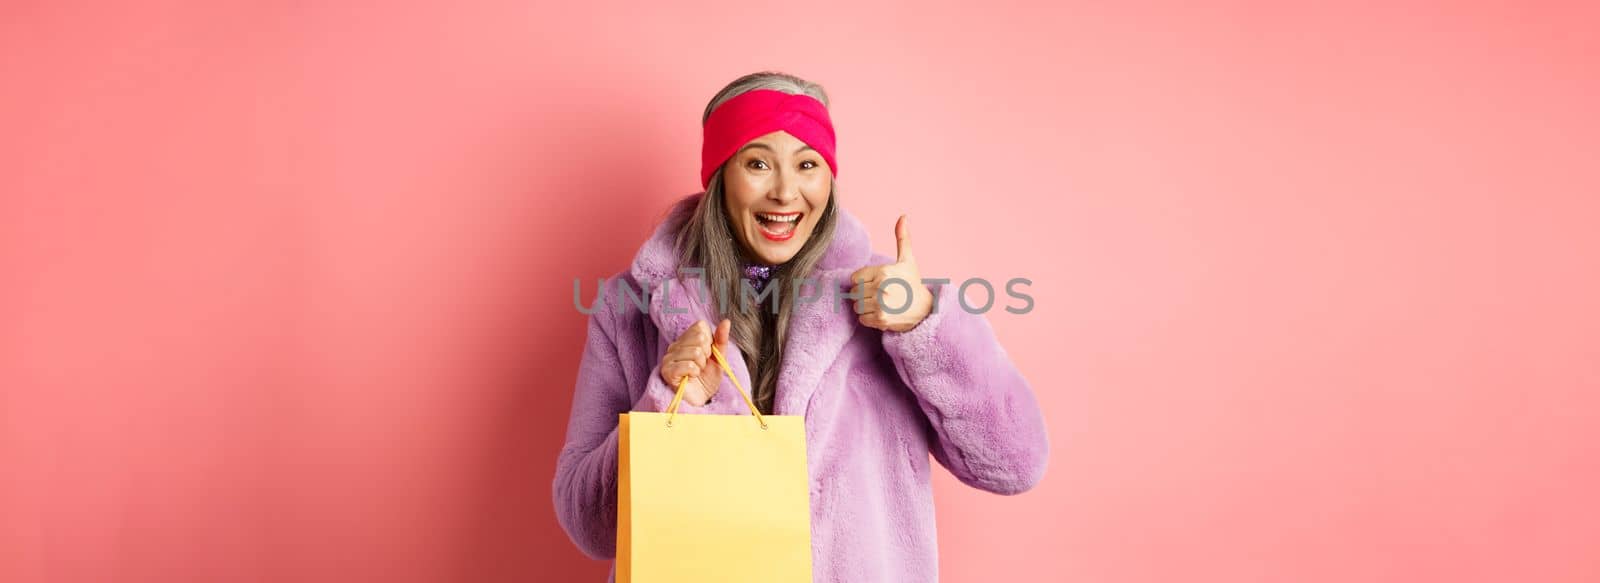 Shopping and fashion. Happy asian senior woman in stylish clothes holding paper bag from store, showing thumb-up in approval, pink background.